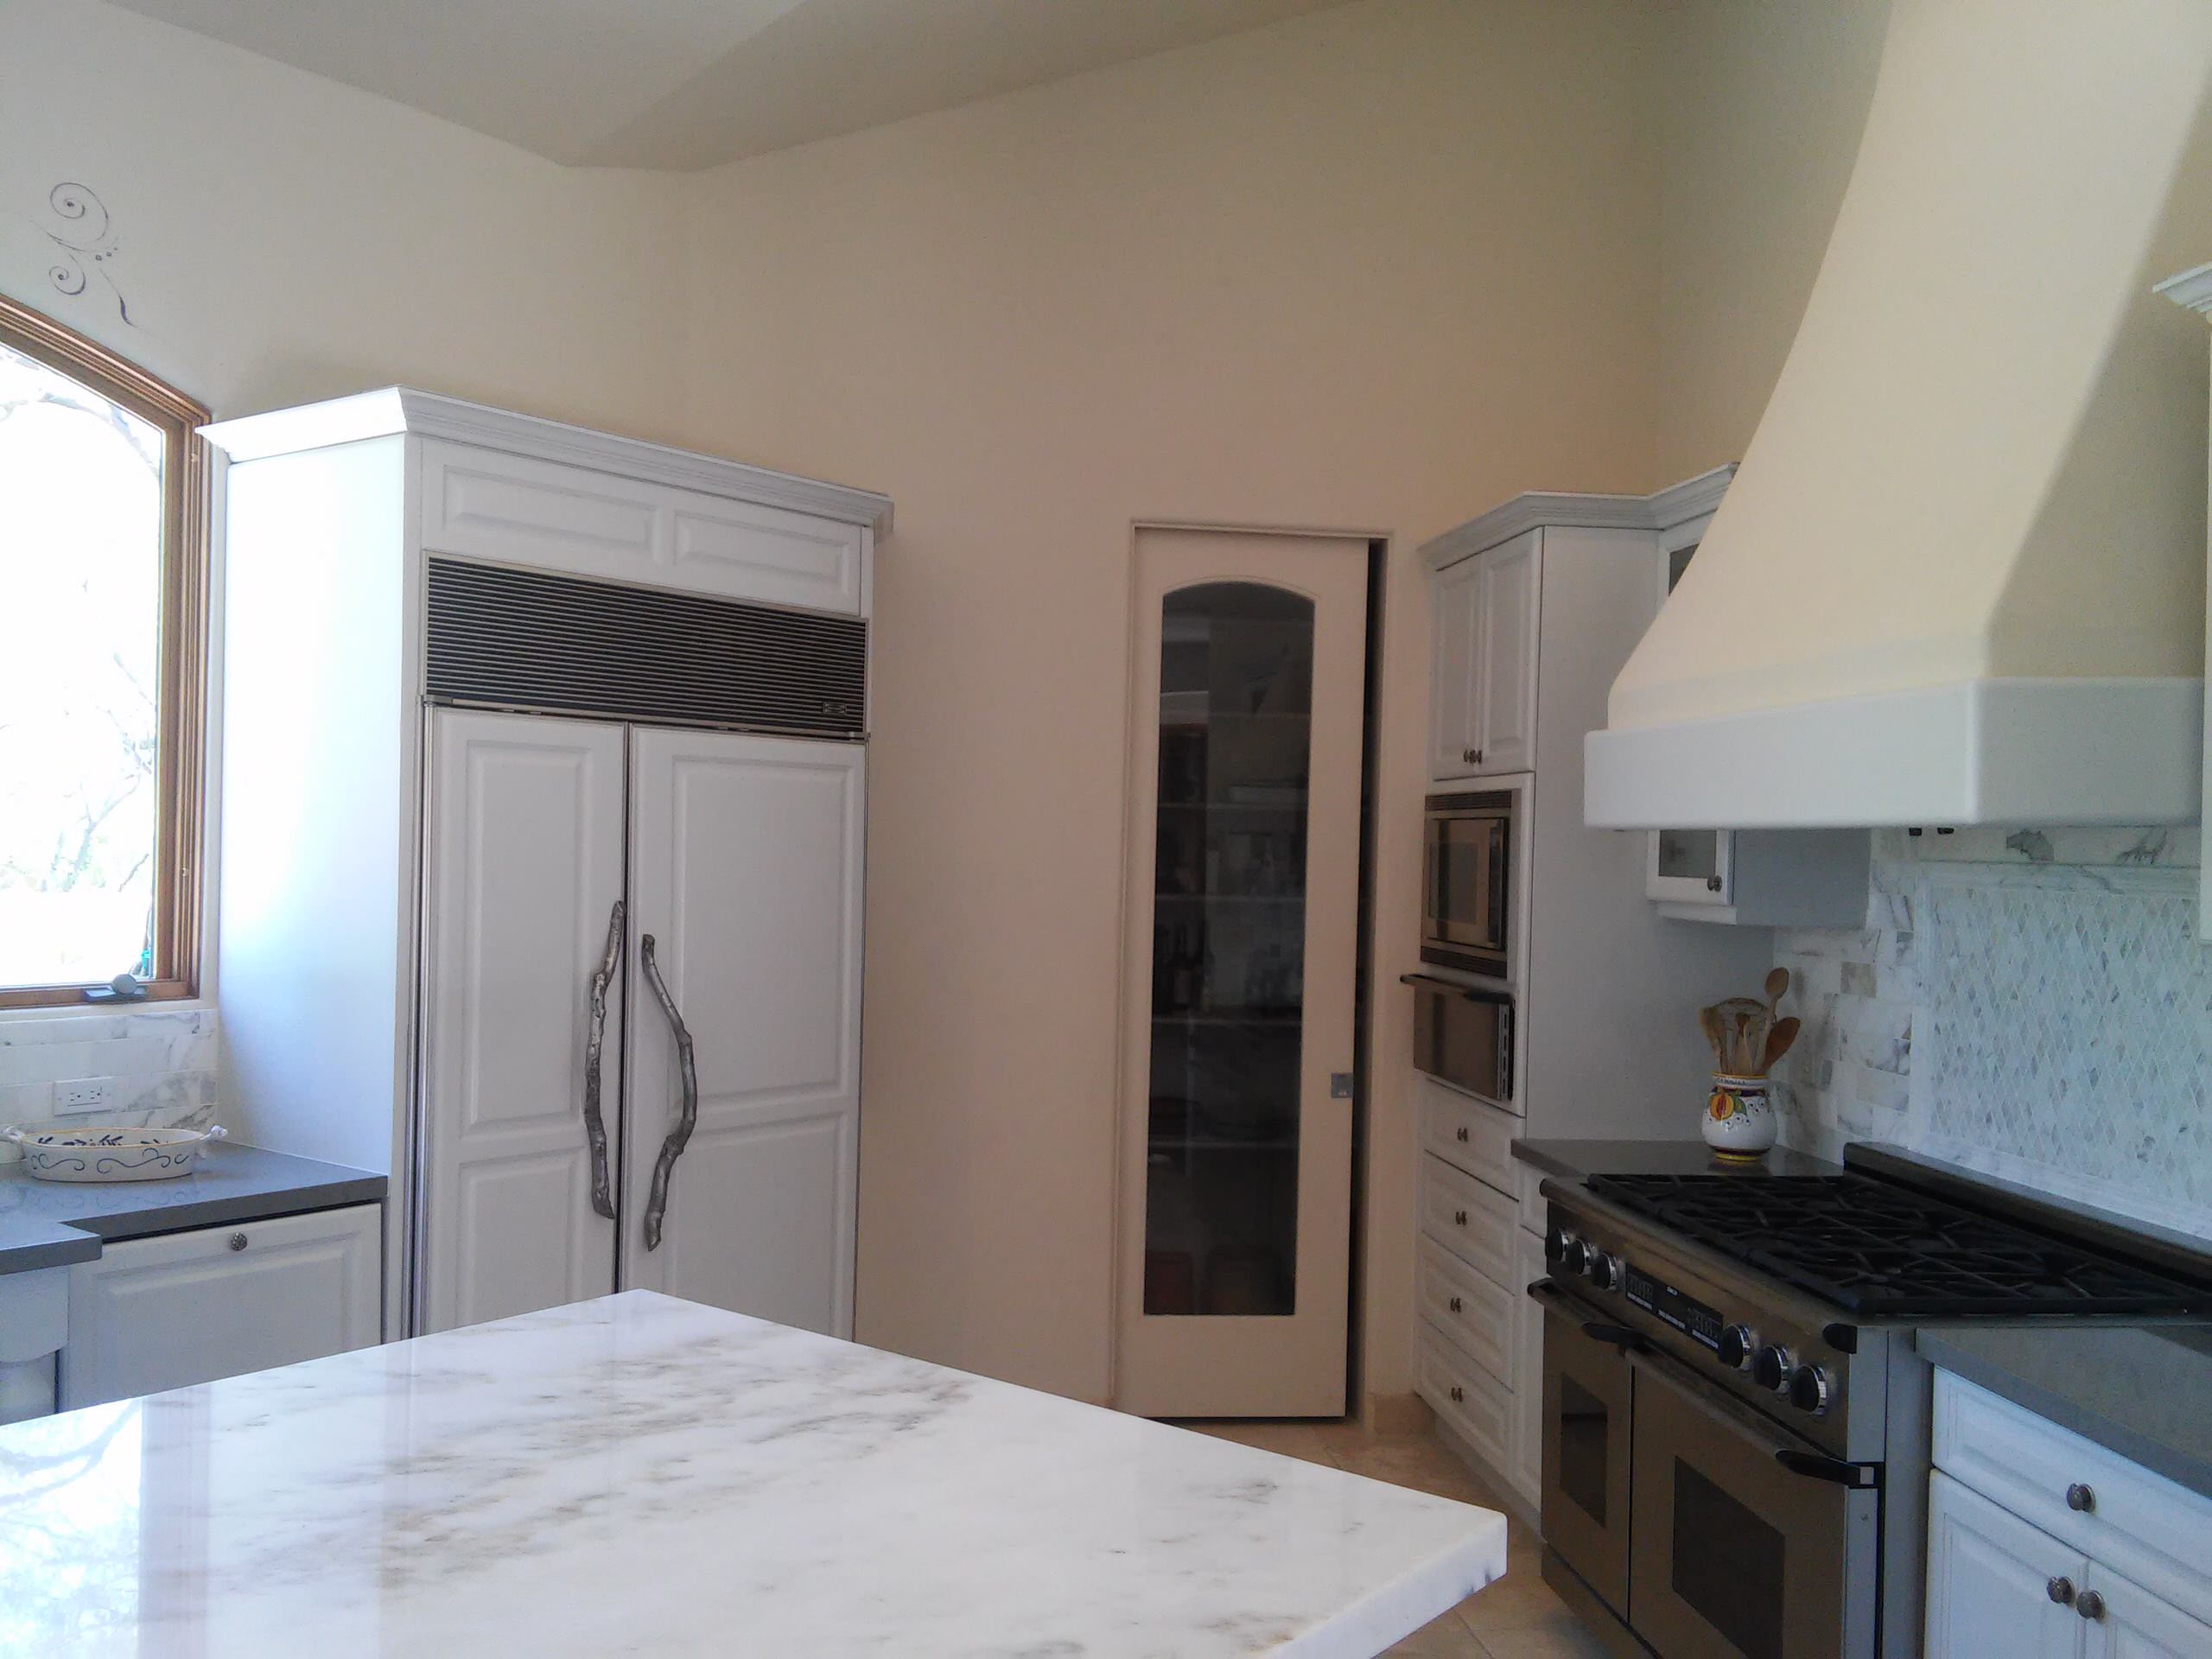 Painted Cabinets With Darker Island Glaze